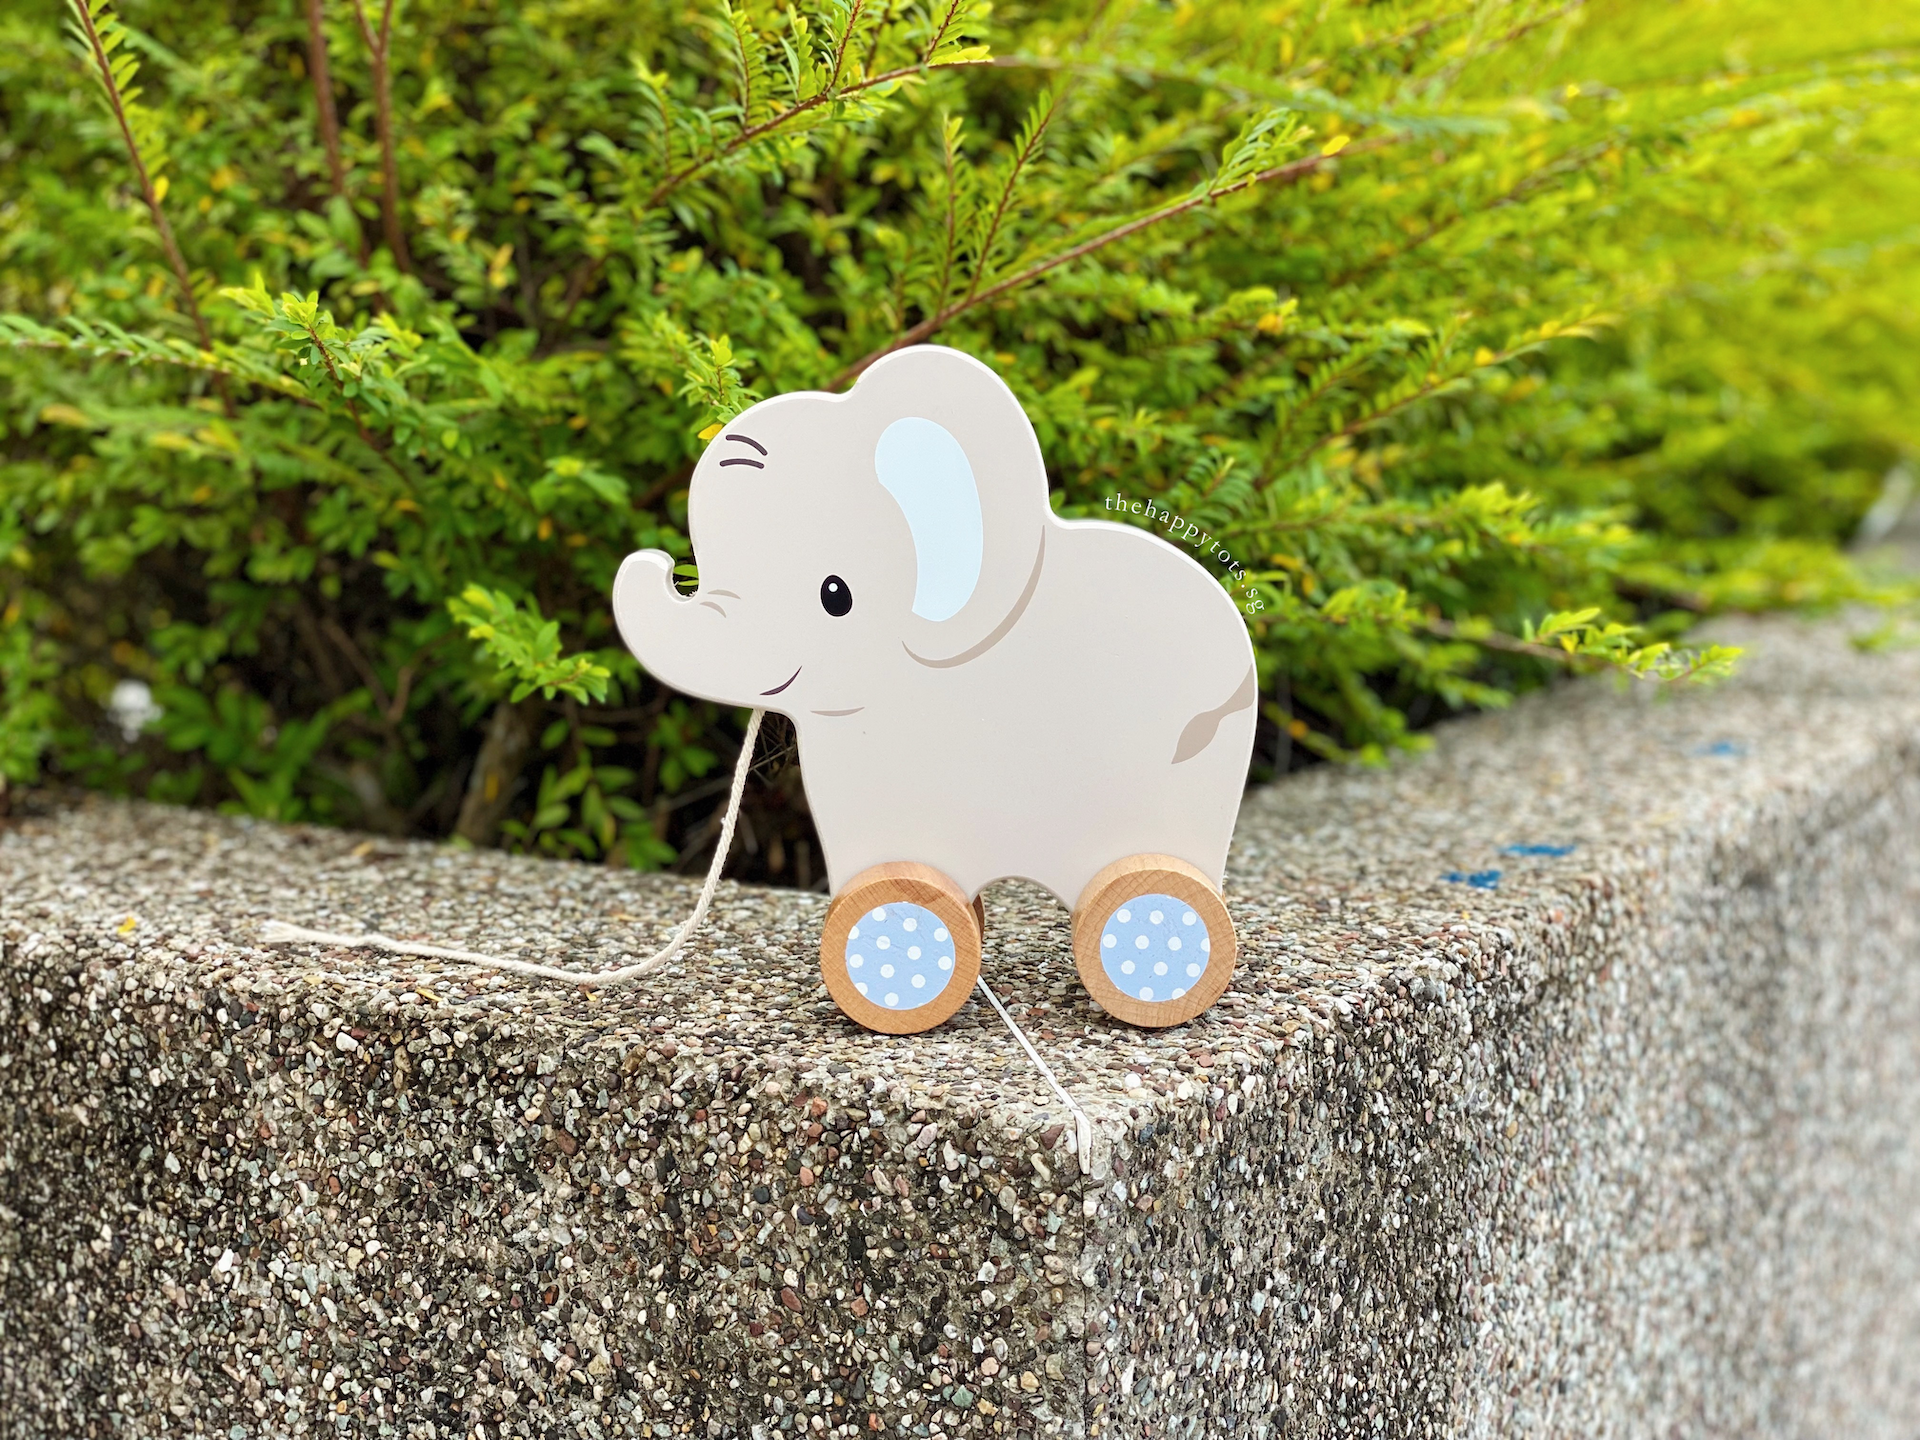 Ellie the Elephant Push and Pull Toy